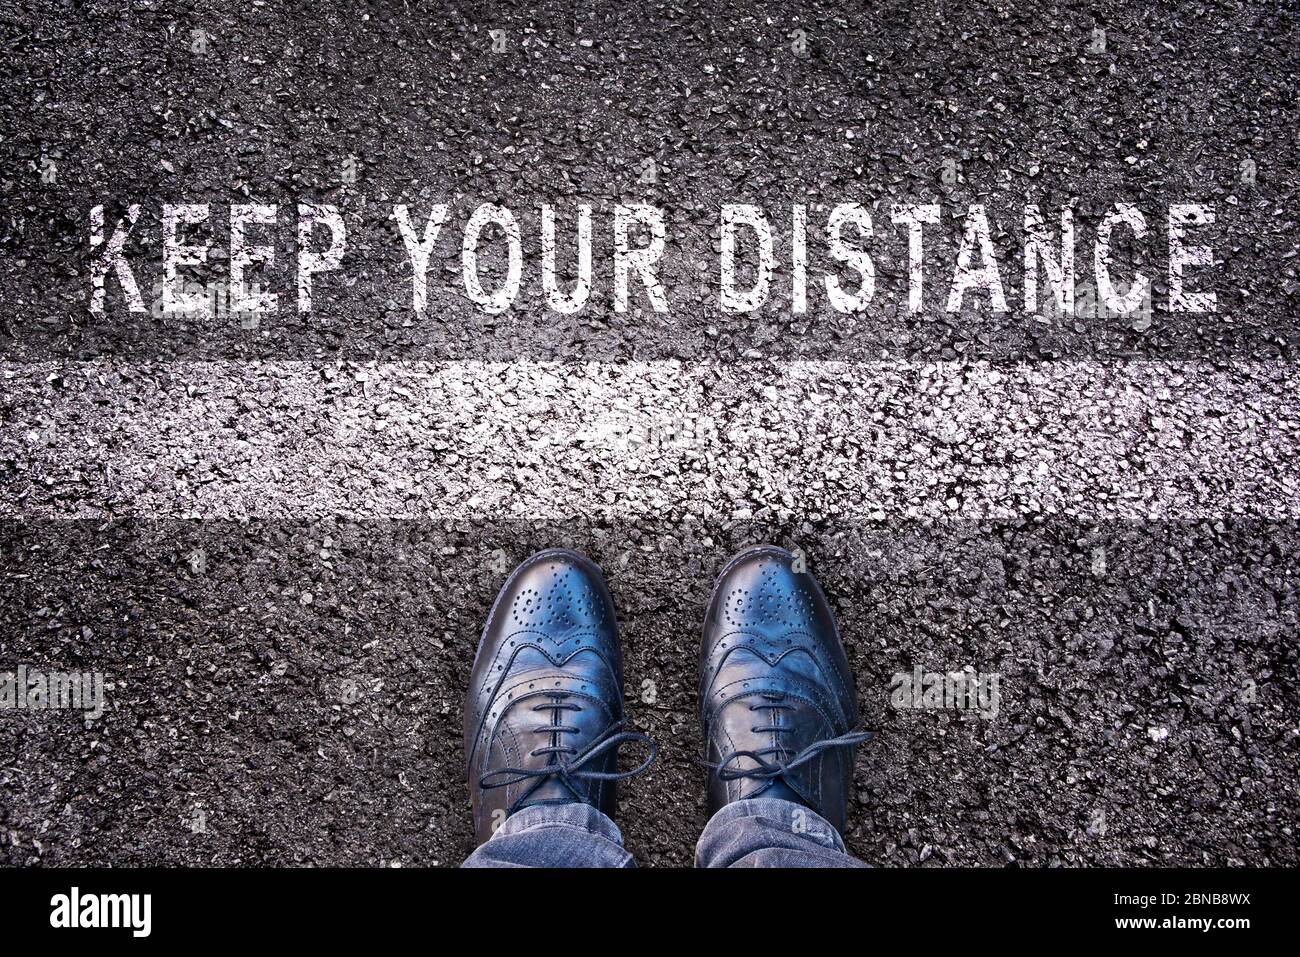 Shoes with message 'Keep your distance' written on asphalt ground Stock Photo